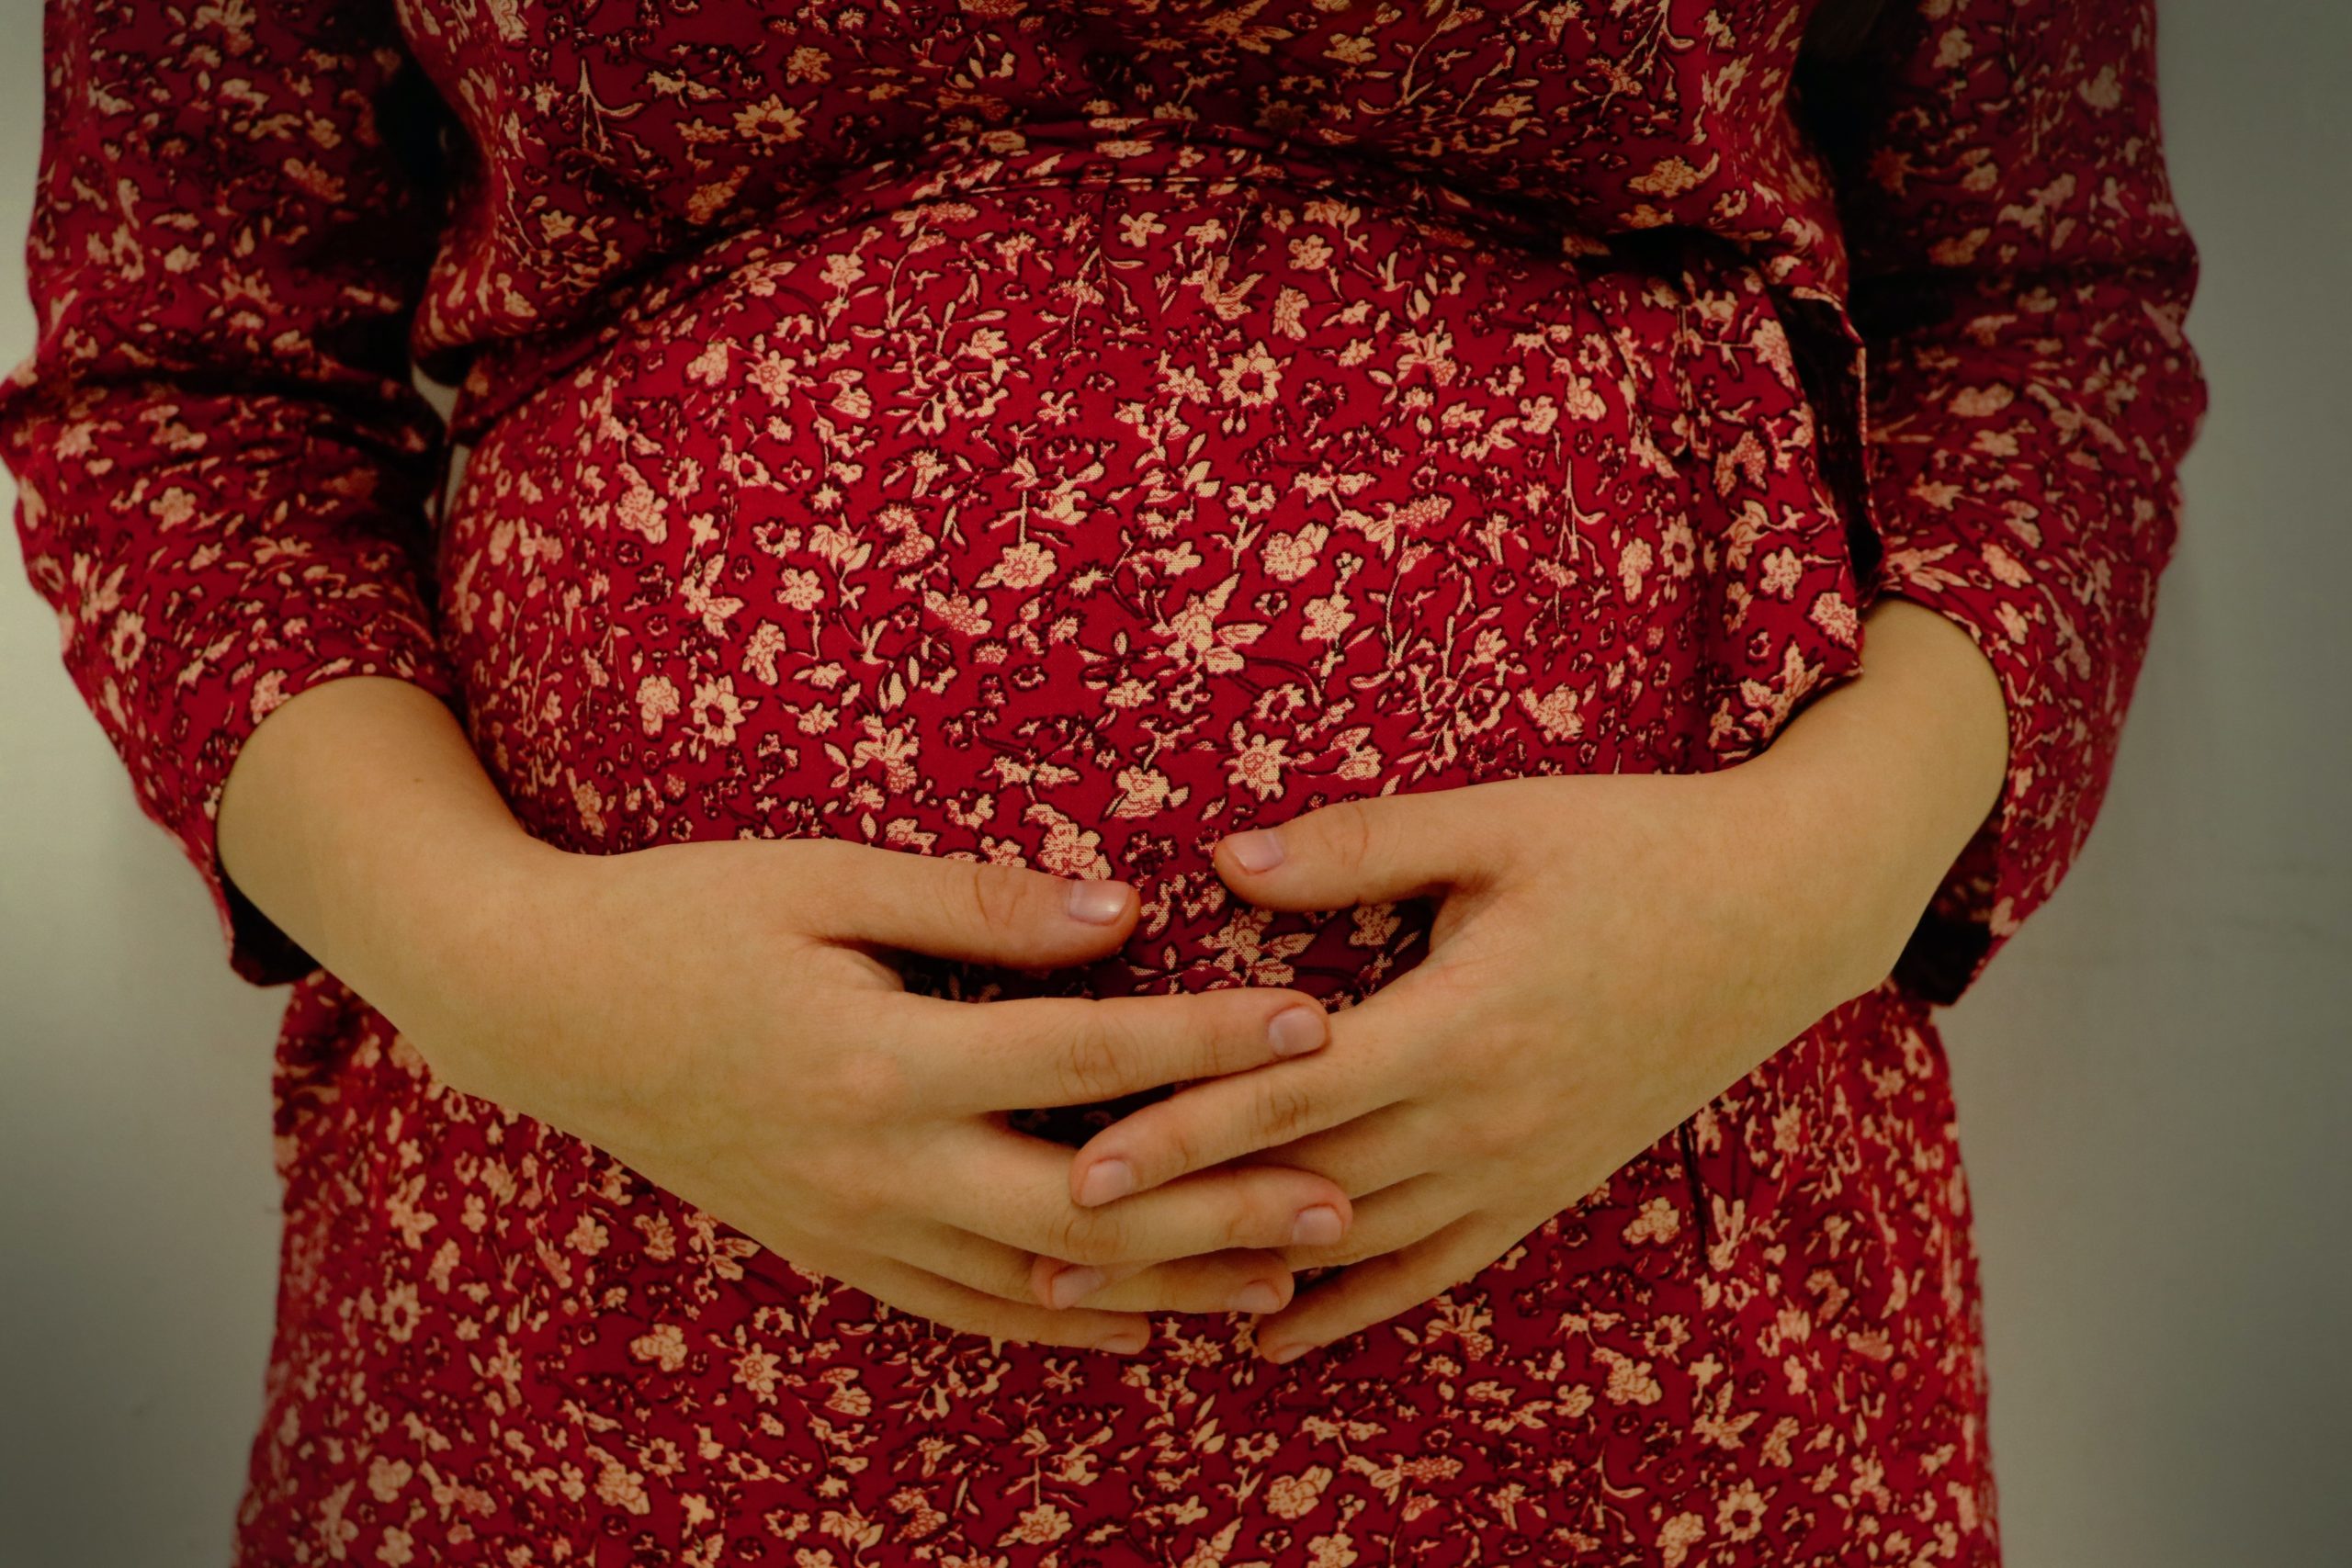 Are you an expectant mother in New Orleans trying to find parents to adopt your child?